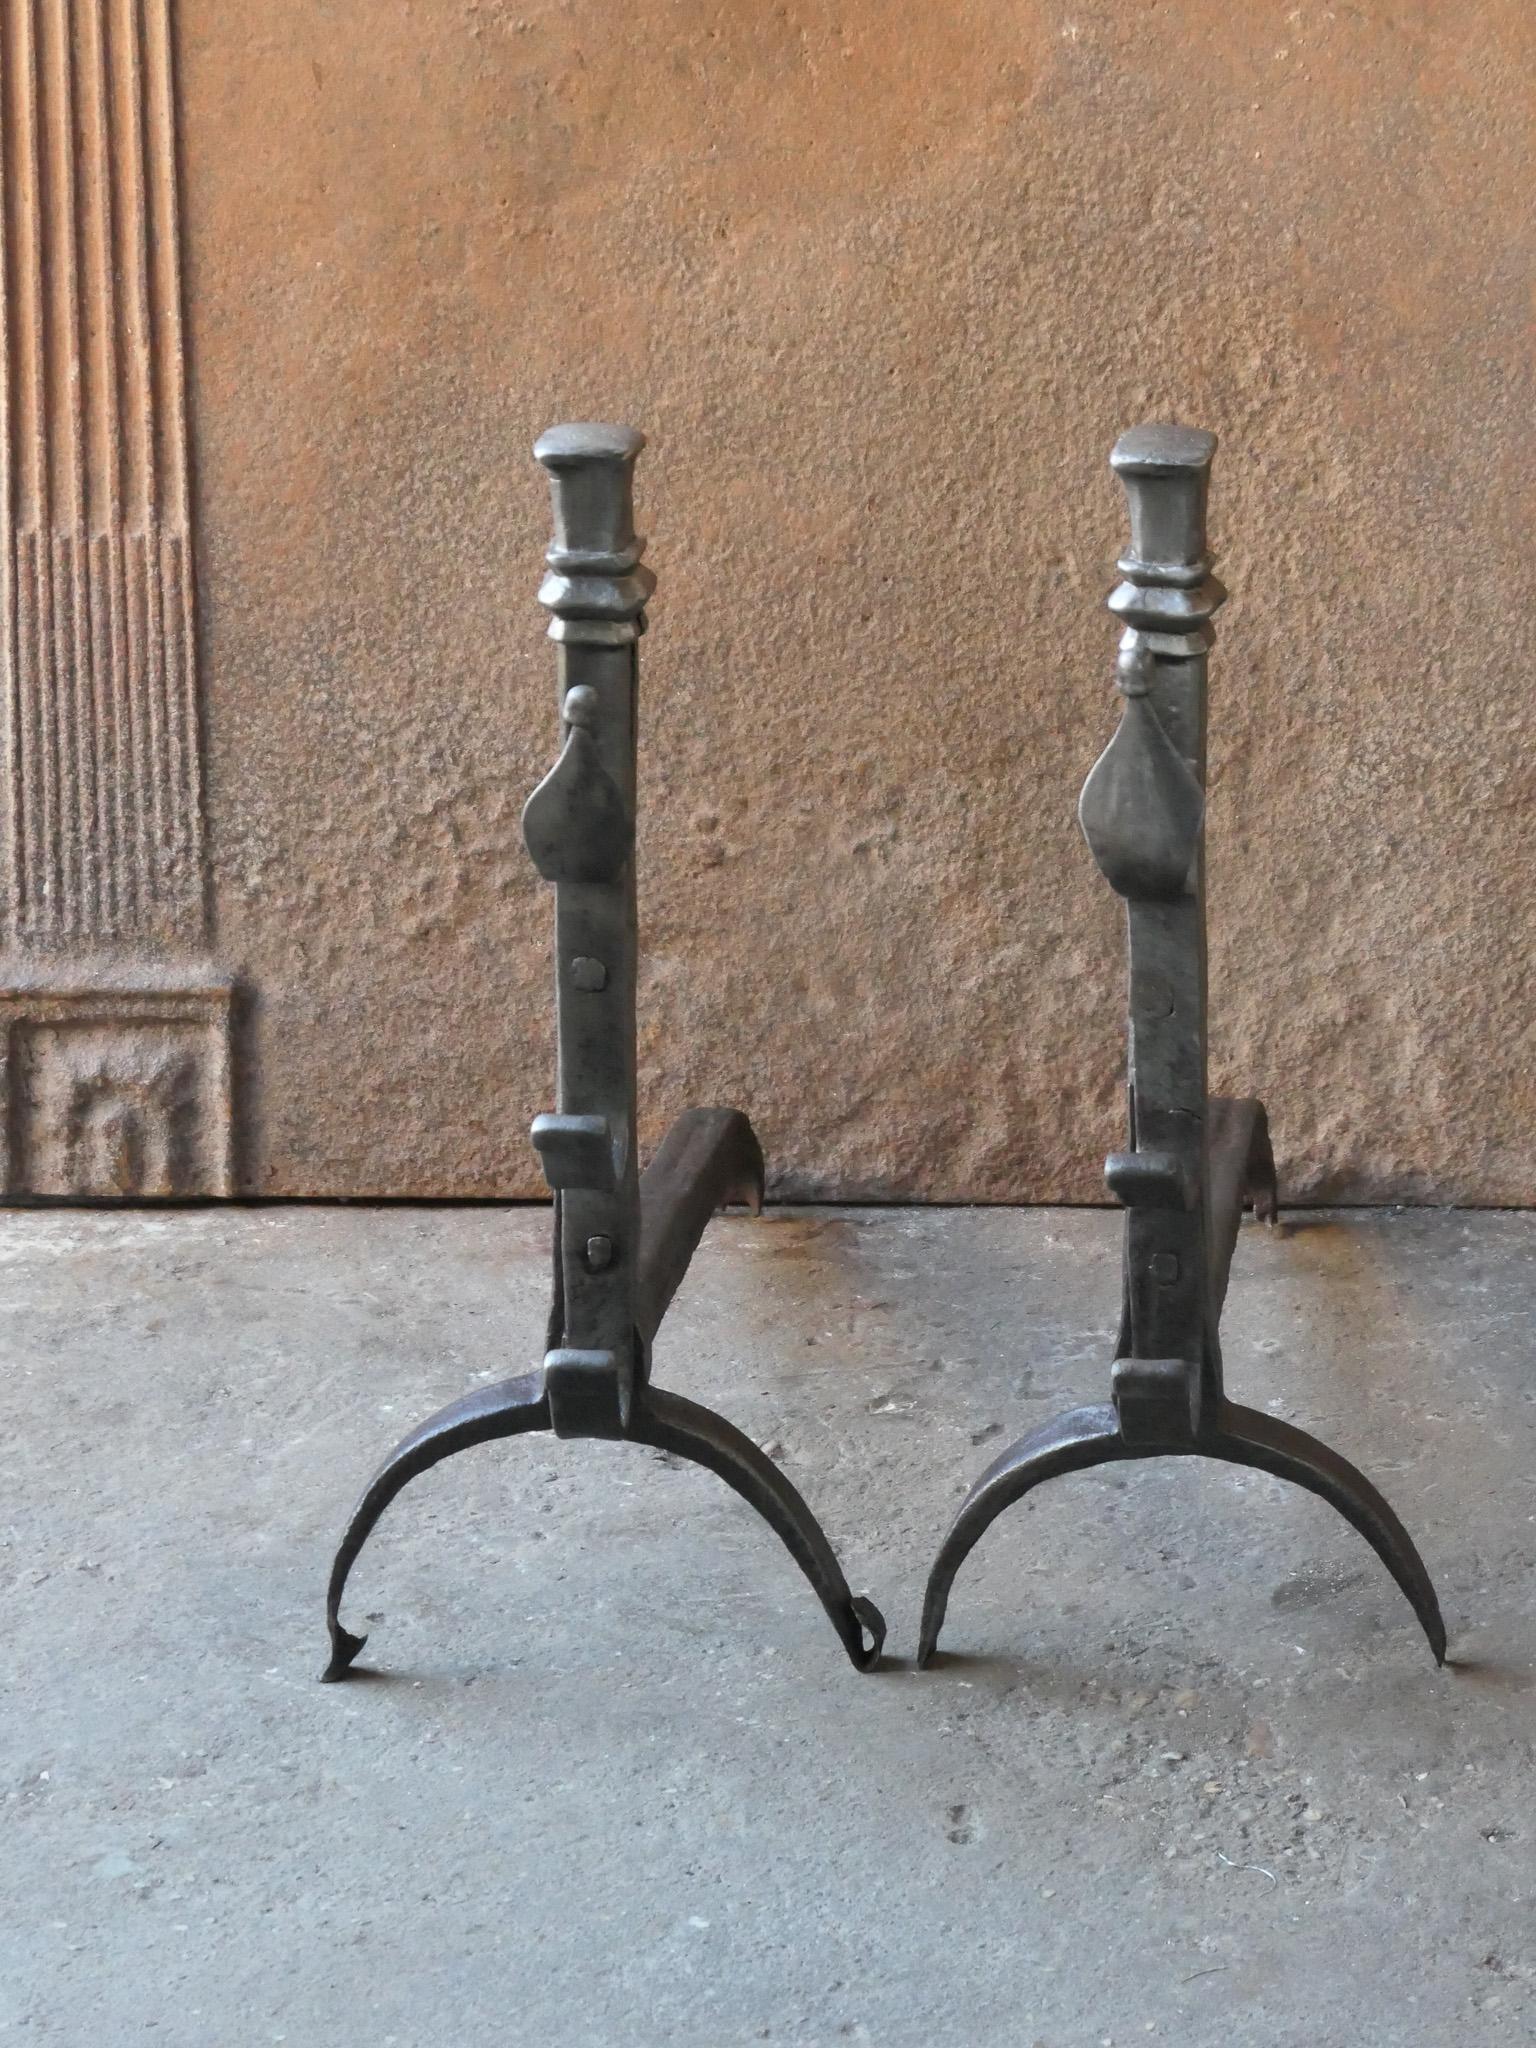 Late 18th or early 19th century French neoclassical period andirons. The andirons are hand forged and made of wrought iron. The condition of the andirons is good.







 